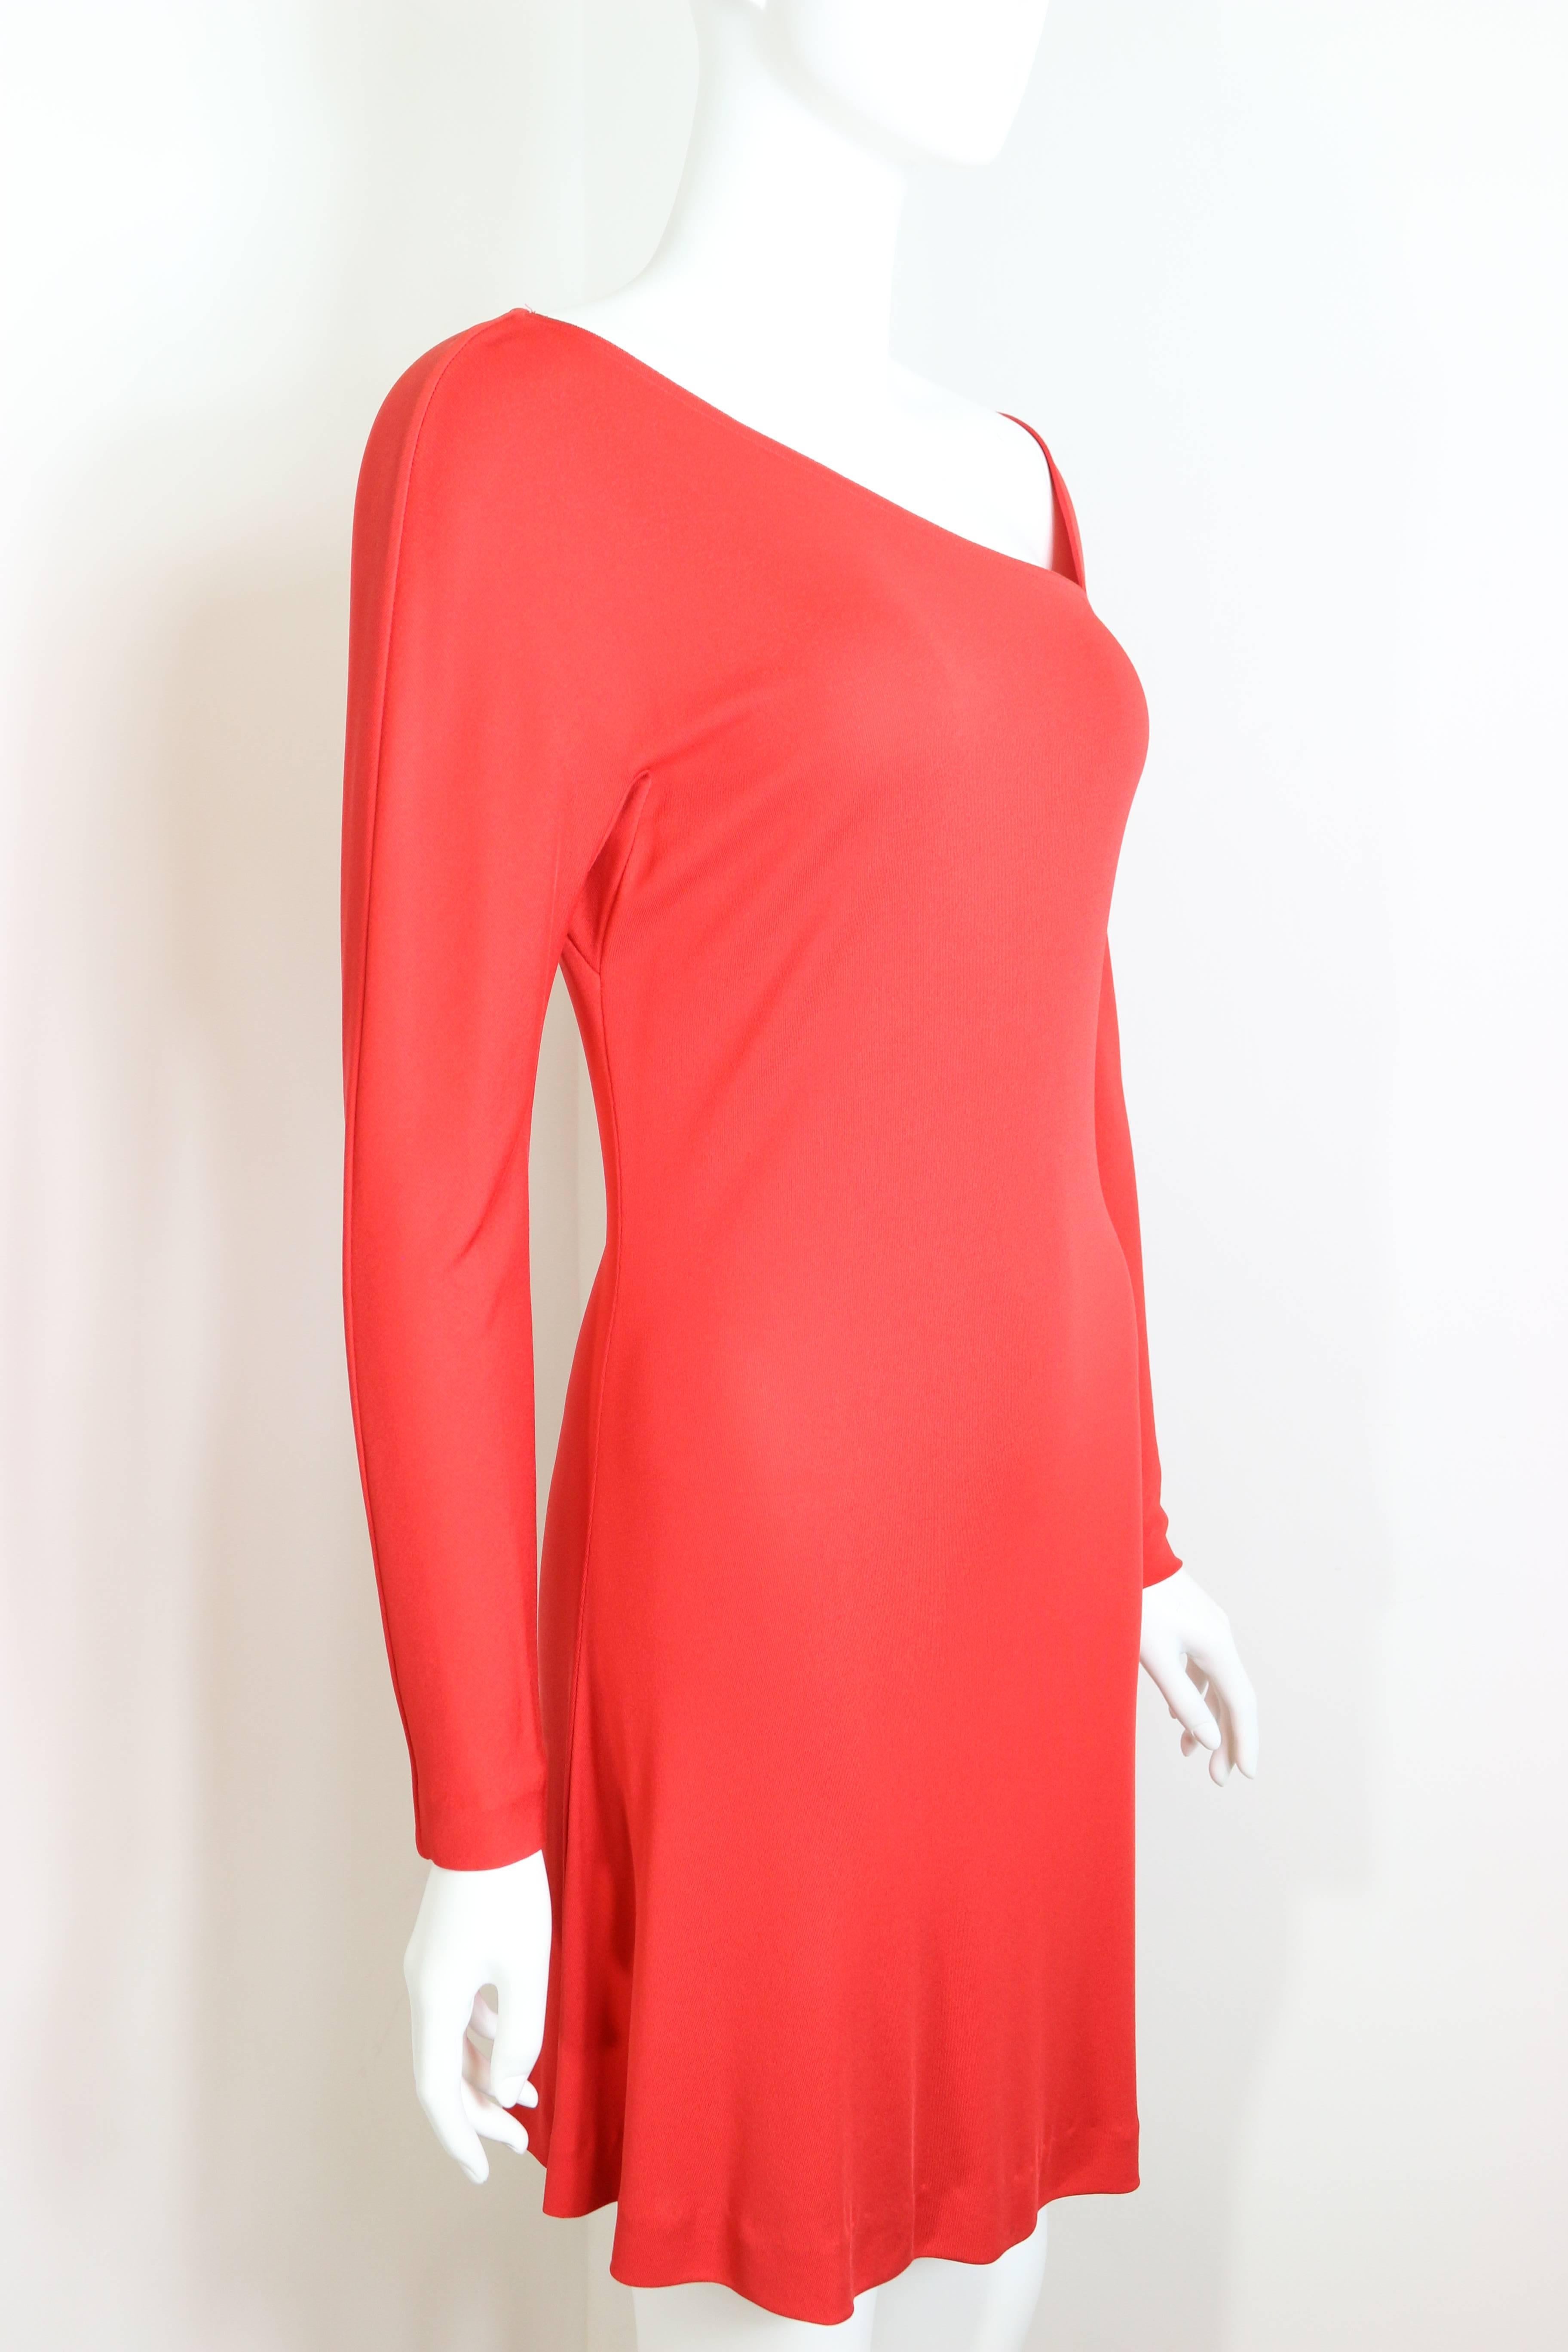 Vintage 90s Gianni Versace Couture Red Asymmetric Dress In Excellent Condition For Sale In Sheung Wan, HK